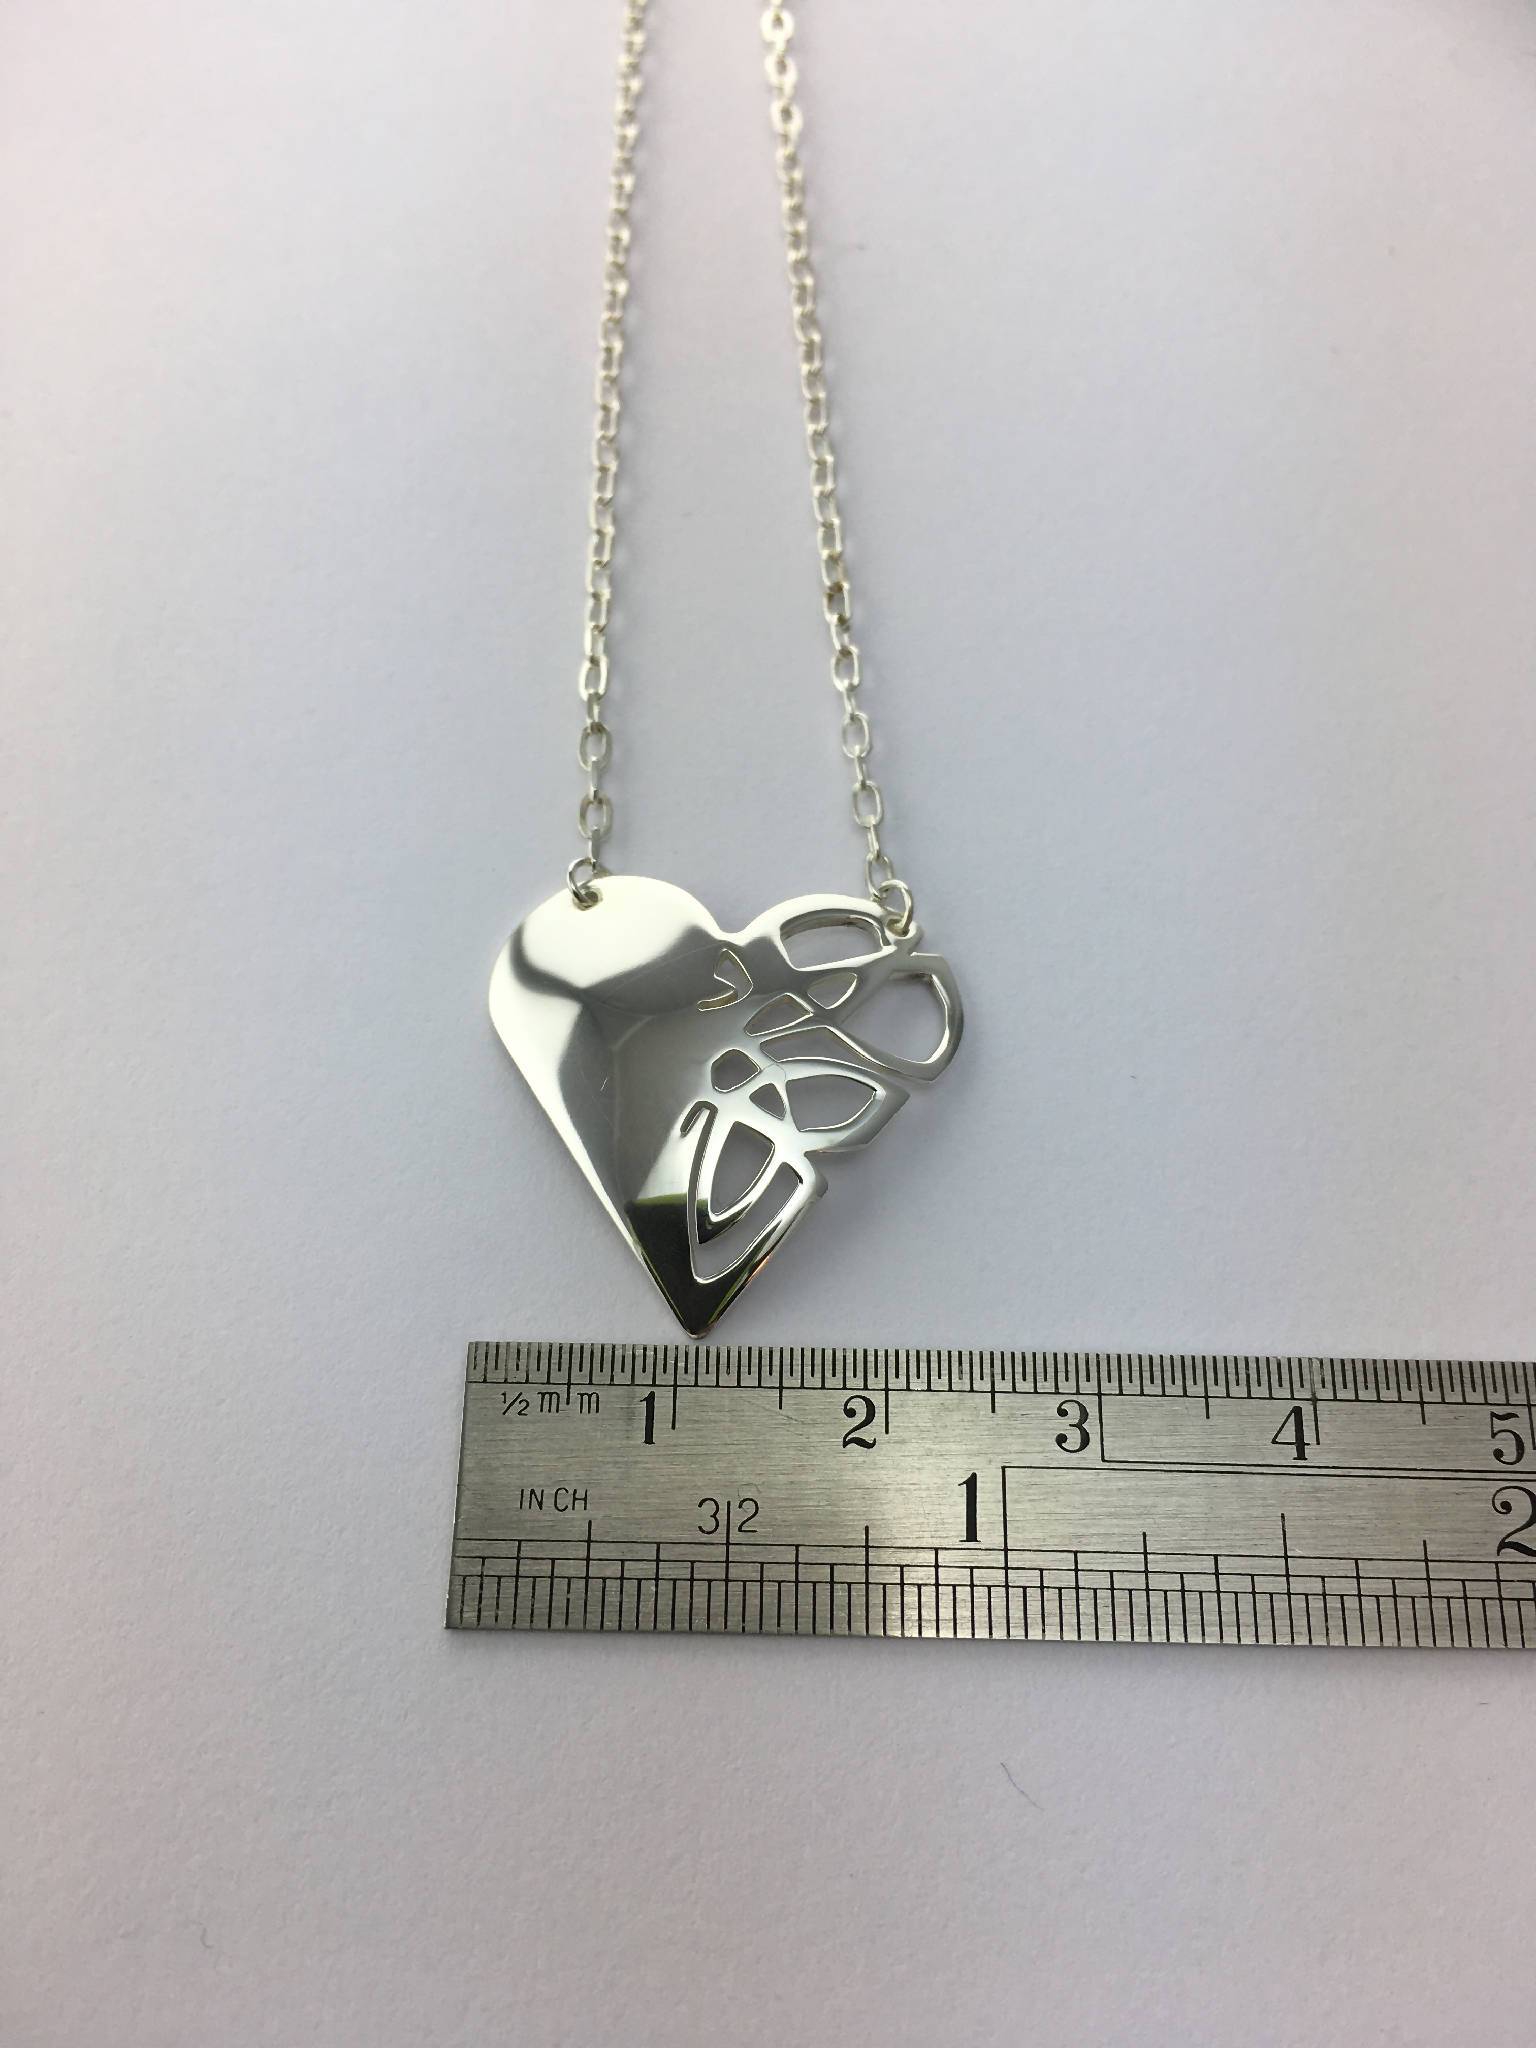 Heart shaped pendant, one side with a Celtic knot design